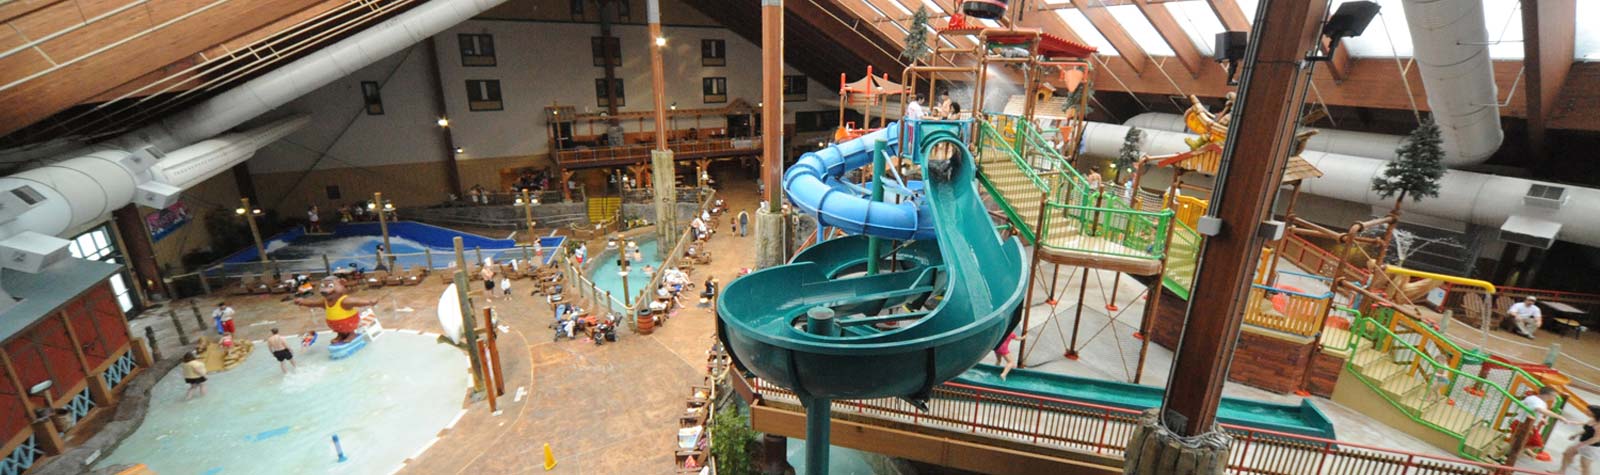 picture of the water park - WideScreen